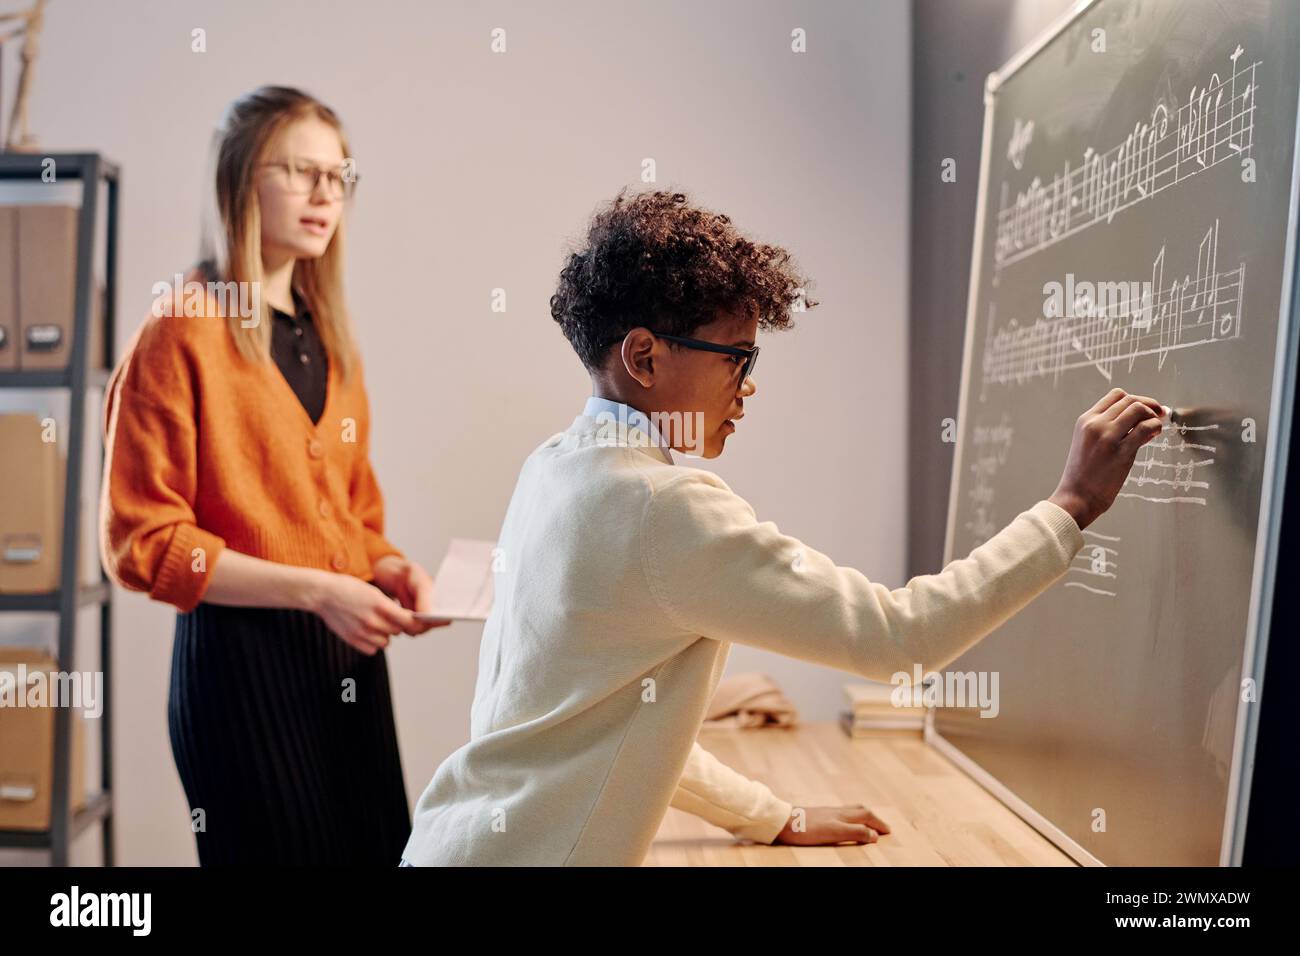 Selective focus shide view shot of African American boy writing music notes on blackboard during solfeggio lesson Stock Photo